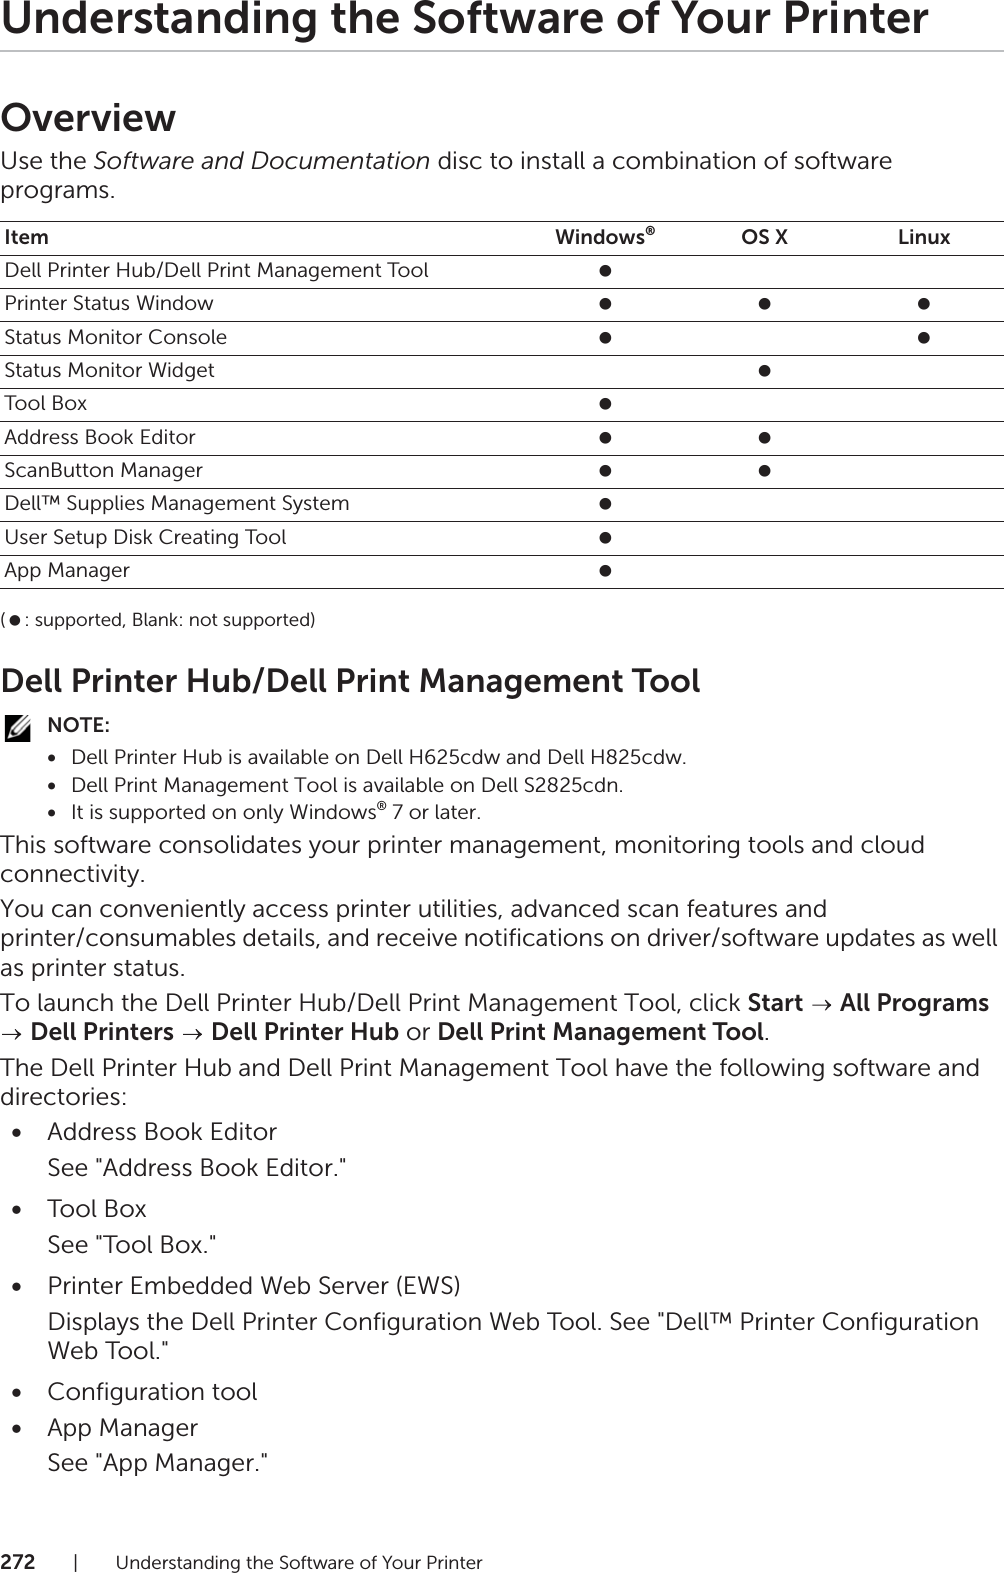 272| Understanding the Software of Your PrinterUnderstanding the Software of Your PrinterOverviewUse the Software and Documentation disc to install a combination of software programs.( : supported, Blank: not supported)Dell Printer Hub/Dell Print Management ToolNOTE:•Dell Printer Hub is available on Dell H625cdw and Dell H825cdw.•Dell Print Management Tool is available on Dell S2825cdn.•It is supported on only Windows® 7 or later.This software consolidates your printer management, monitoring tools and cloud connectivity.You can conveniently access printer utilities, advanced scan features and printer/consumables details, and receive notifications on driver/software updates as well as printer status.To launch the Dell Printer Hub/Dell Print Management Tool, click Start  All Programs  Dell Printers  Dell Printer Hub or Dell Print Management Tool.The Dell Printer Hub and Dell Print Management Tool have the following software and directories:•Address Book EditorSee &quot;Address Book Editor.&quot;•Tool BoxSee &quot;Tool Box.&quot;•Printer Embedded Web Server (EWS)Displays the Dell Printer Configuration Web Tool. See &quot;Dell™ Printer Configuration Web Tool.&quot;•Configuration tool•App ManagerSee &quot;App Manager.&quot;Item Windows®OS X LinuxDell Printer Hub/Dell Print Management Tool   Printer Status Window    Status Monitor Console   Status Monitor Widget  Tool Box  Address Book Editor   ScanButton Manager   Dell™ Supplies Management System  User Setup Disk Creating Tool  App Manager  